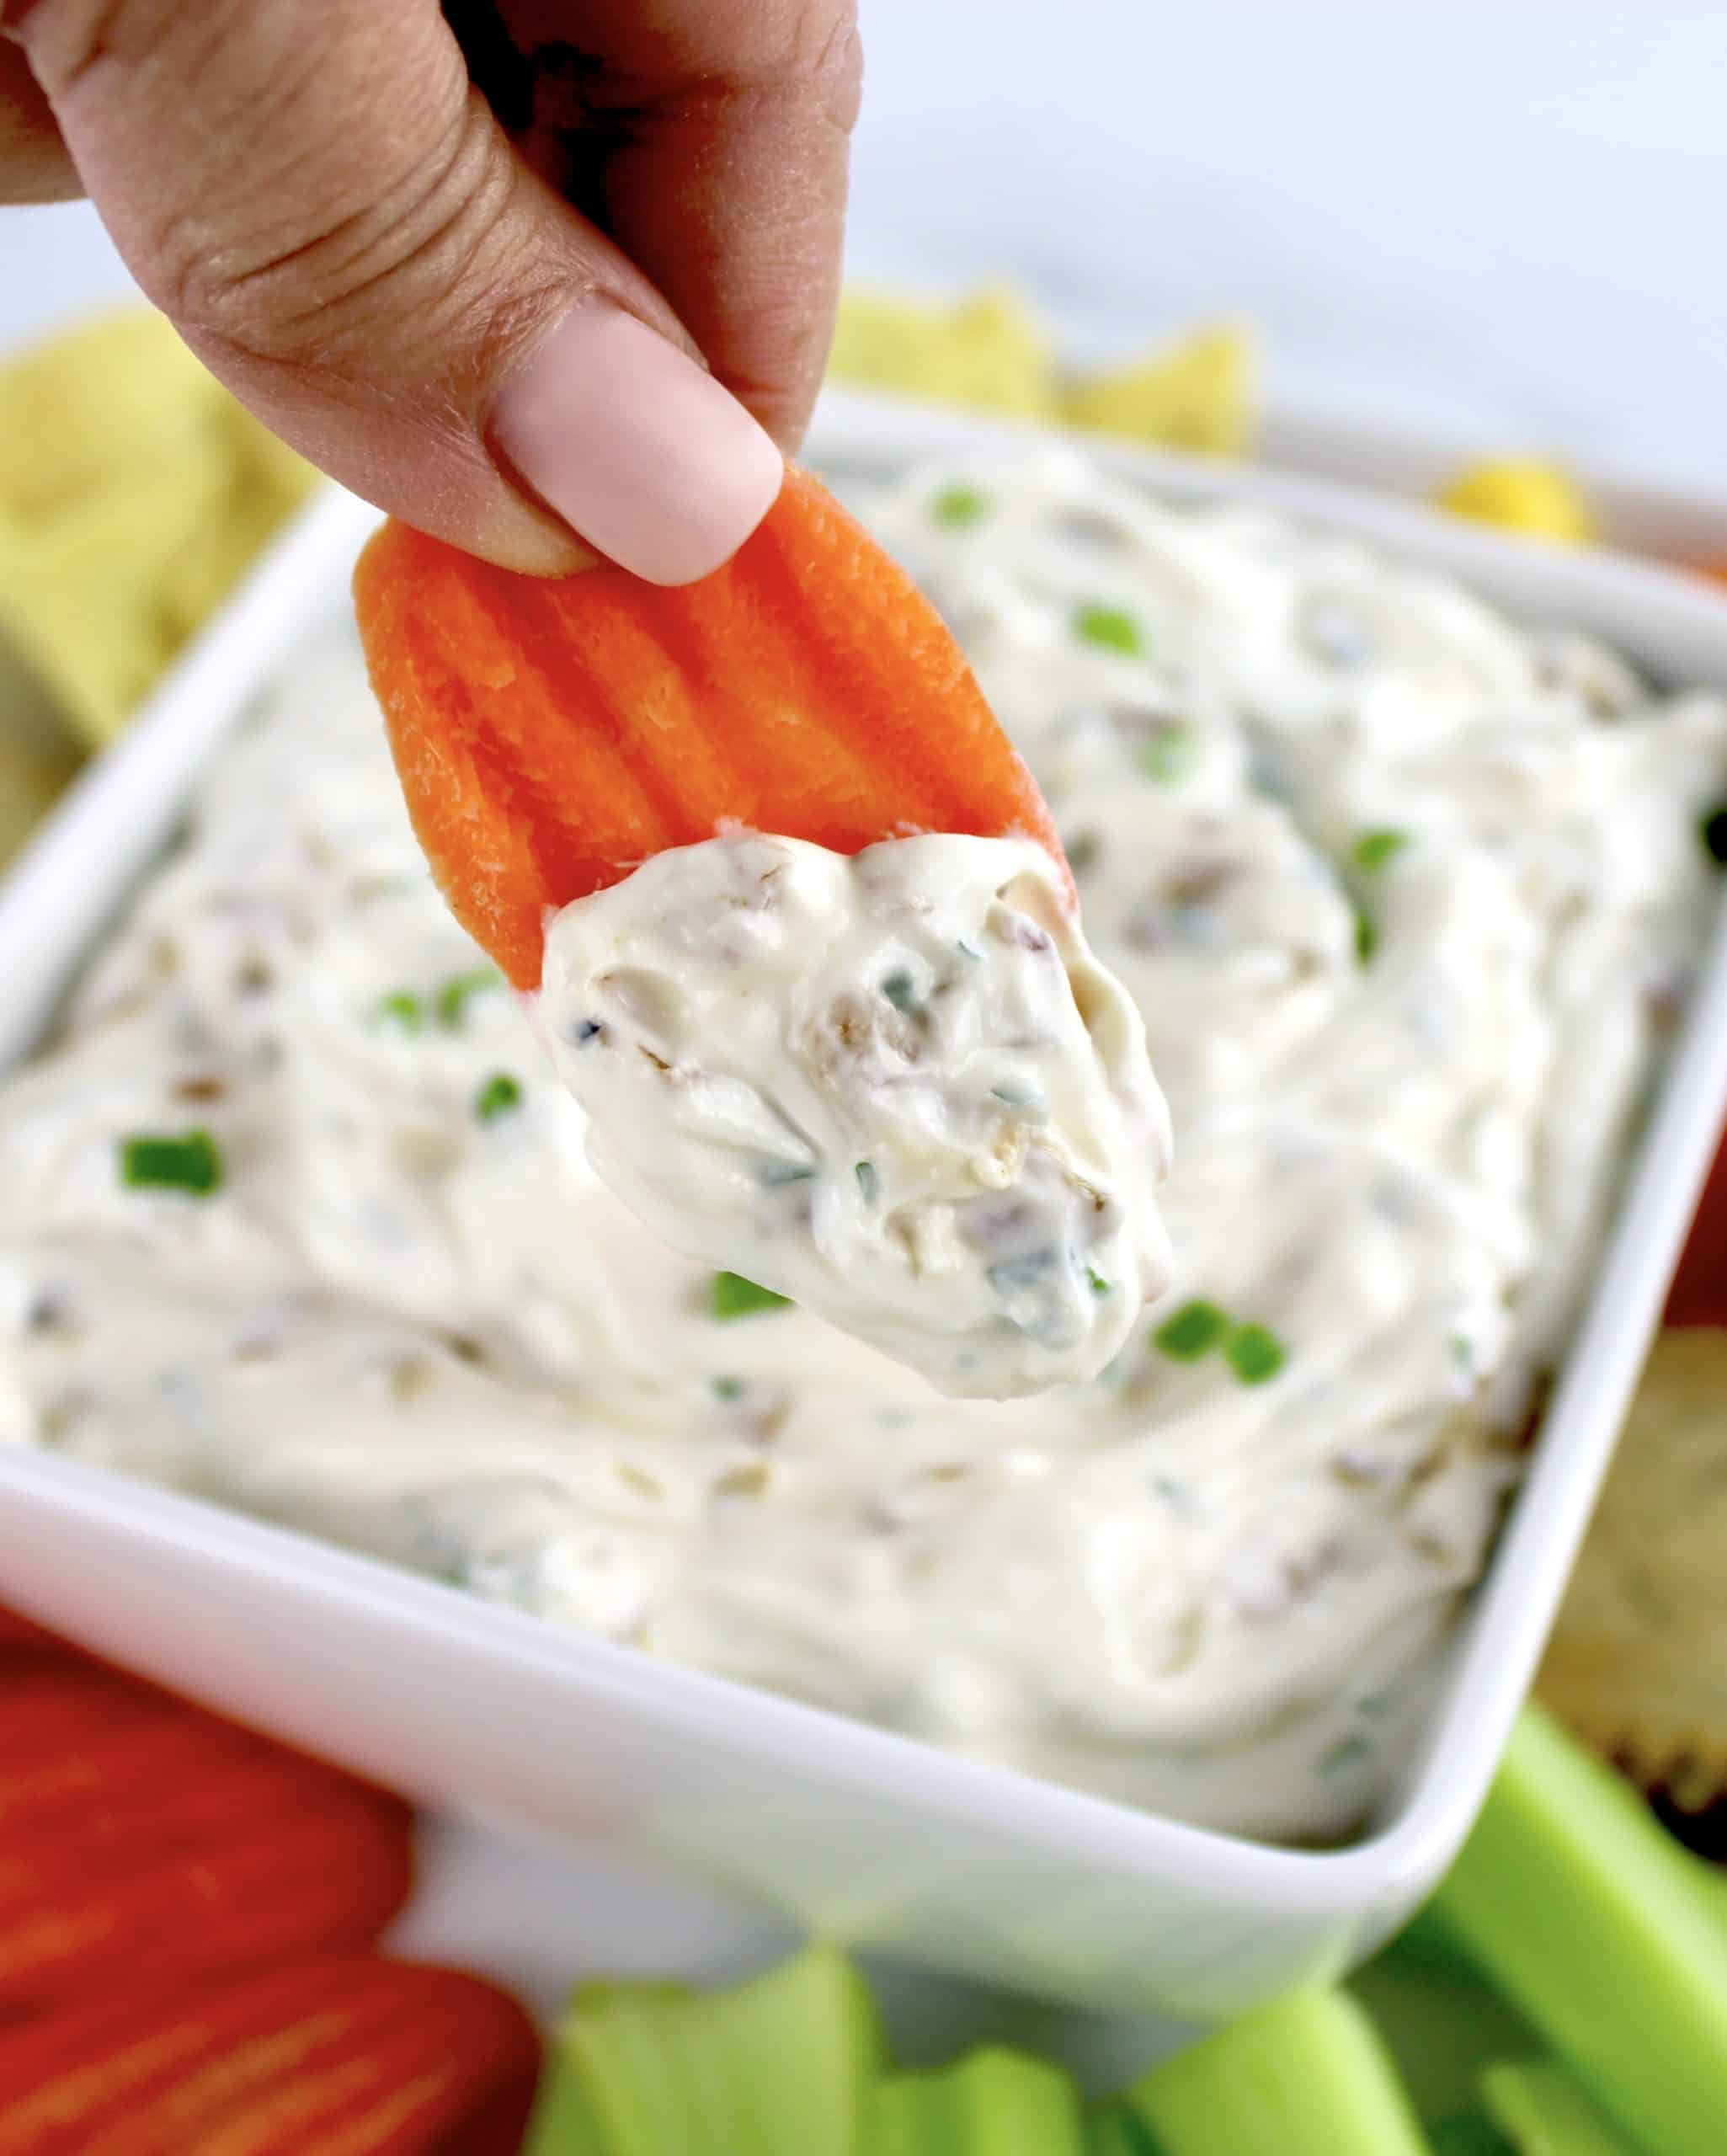 carrot being dipped into Homemade French Onion Dip in white bowl